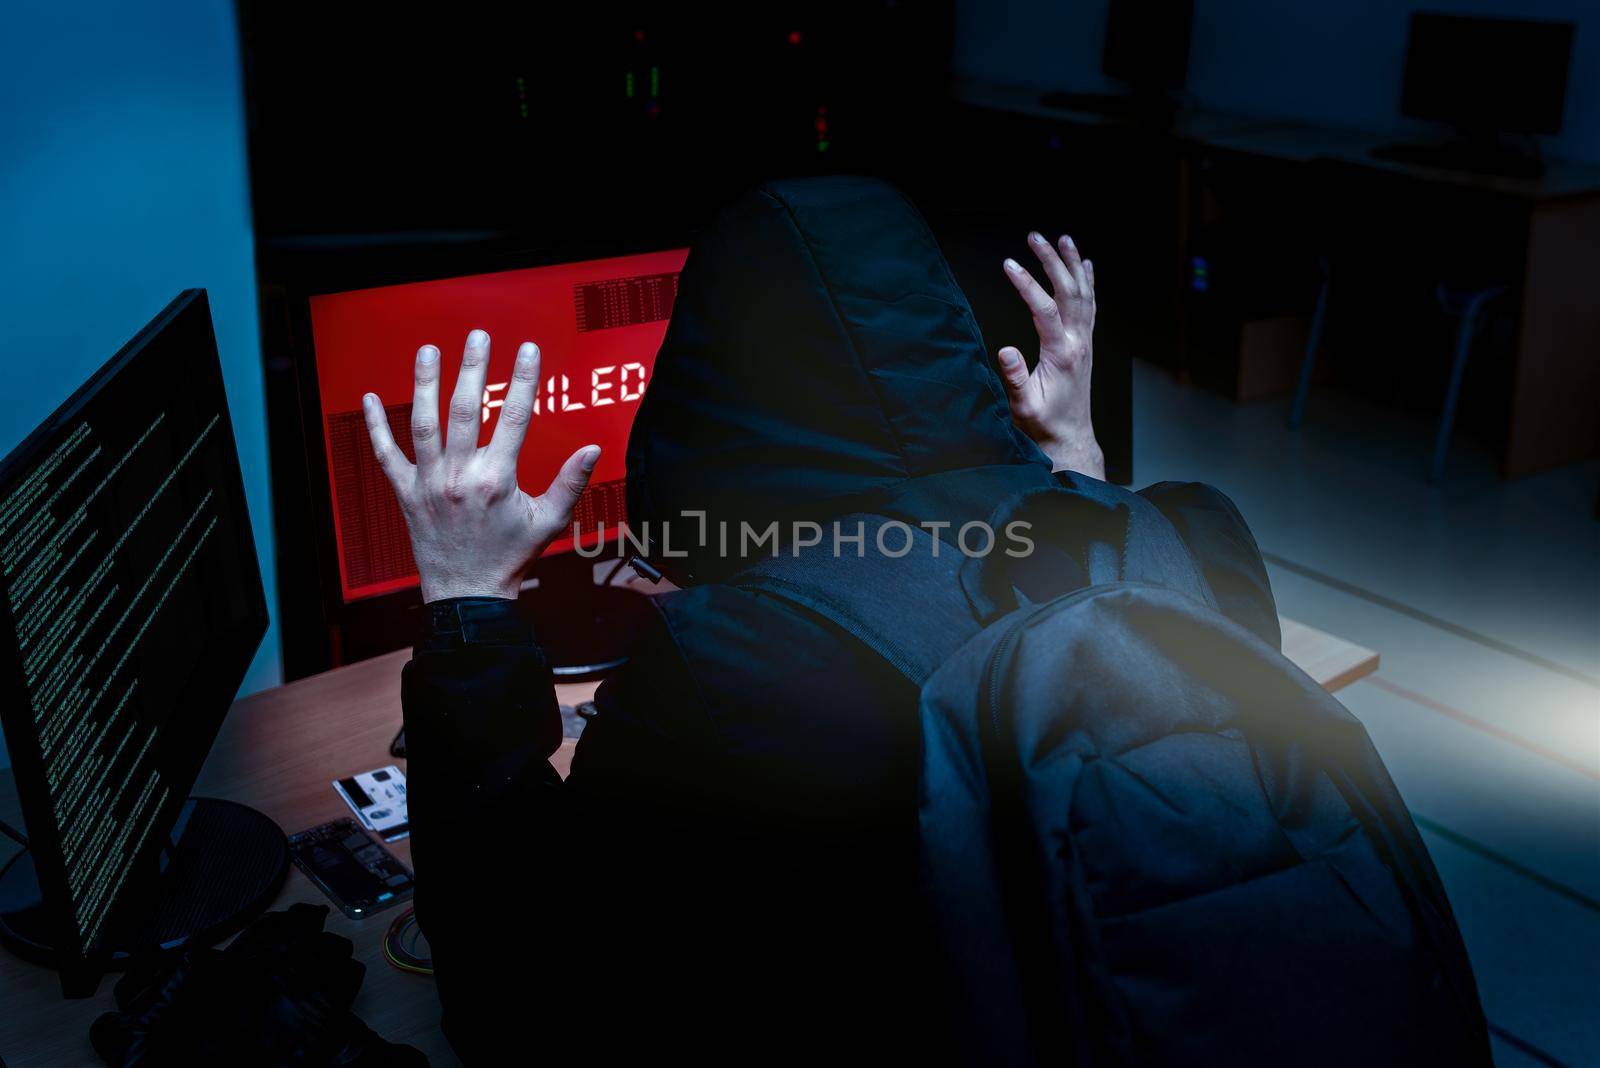 Internet criminal hacker trying to hack into corporate servers arrested by police at night. Portrait of a surrendered computer hacker who raised his hands under a flashlight. failed system hack